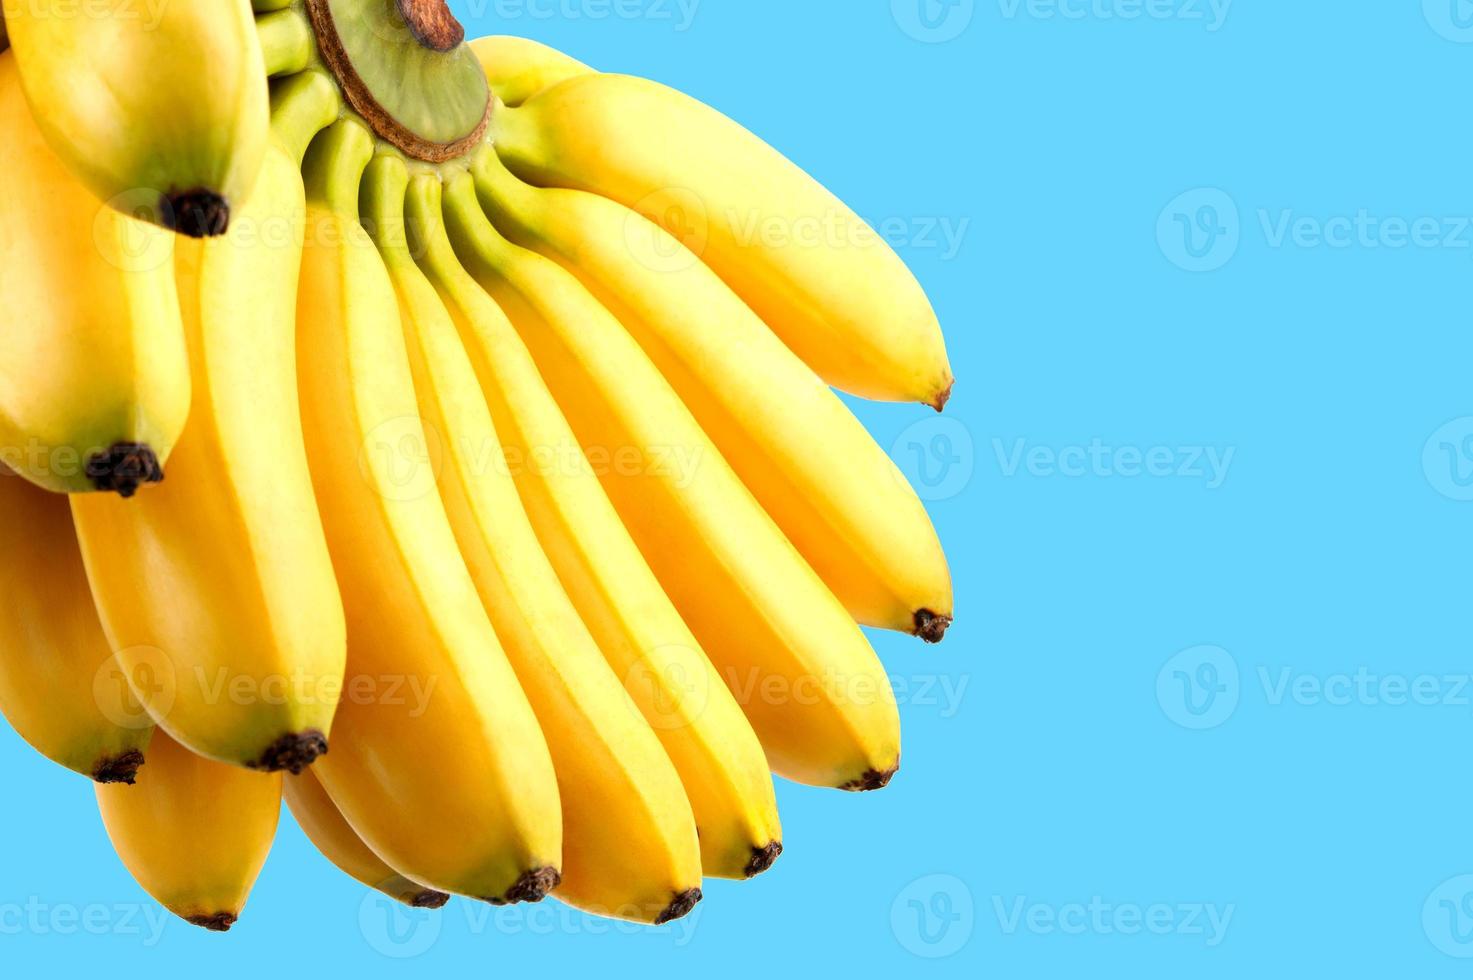 Bunch of bananas on a blue background. Delicious ripe bananas. photo